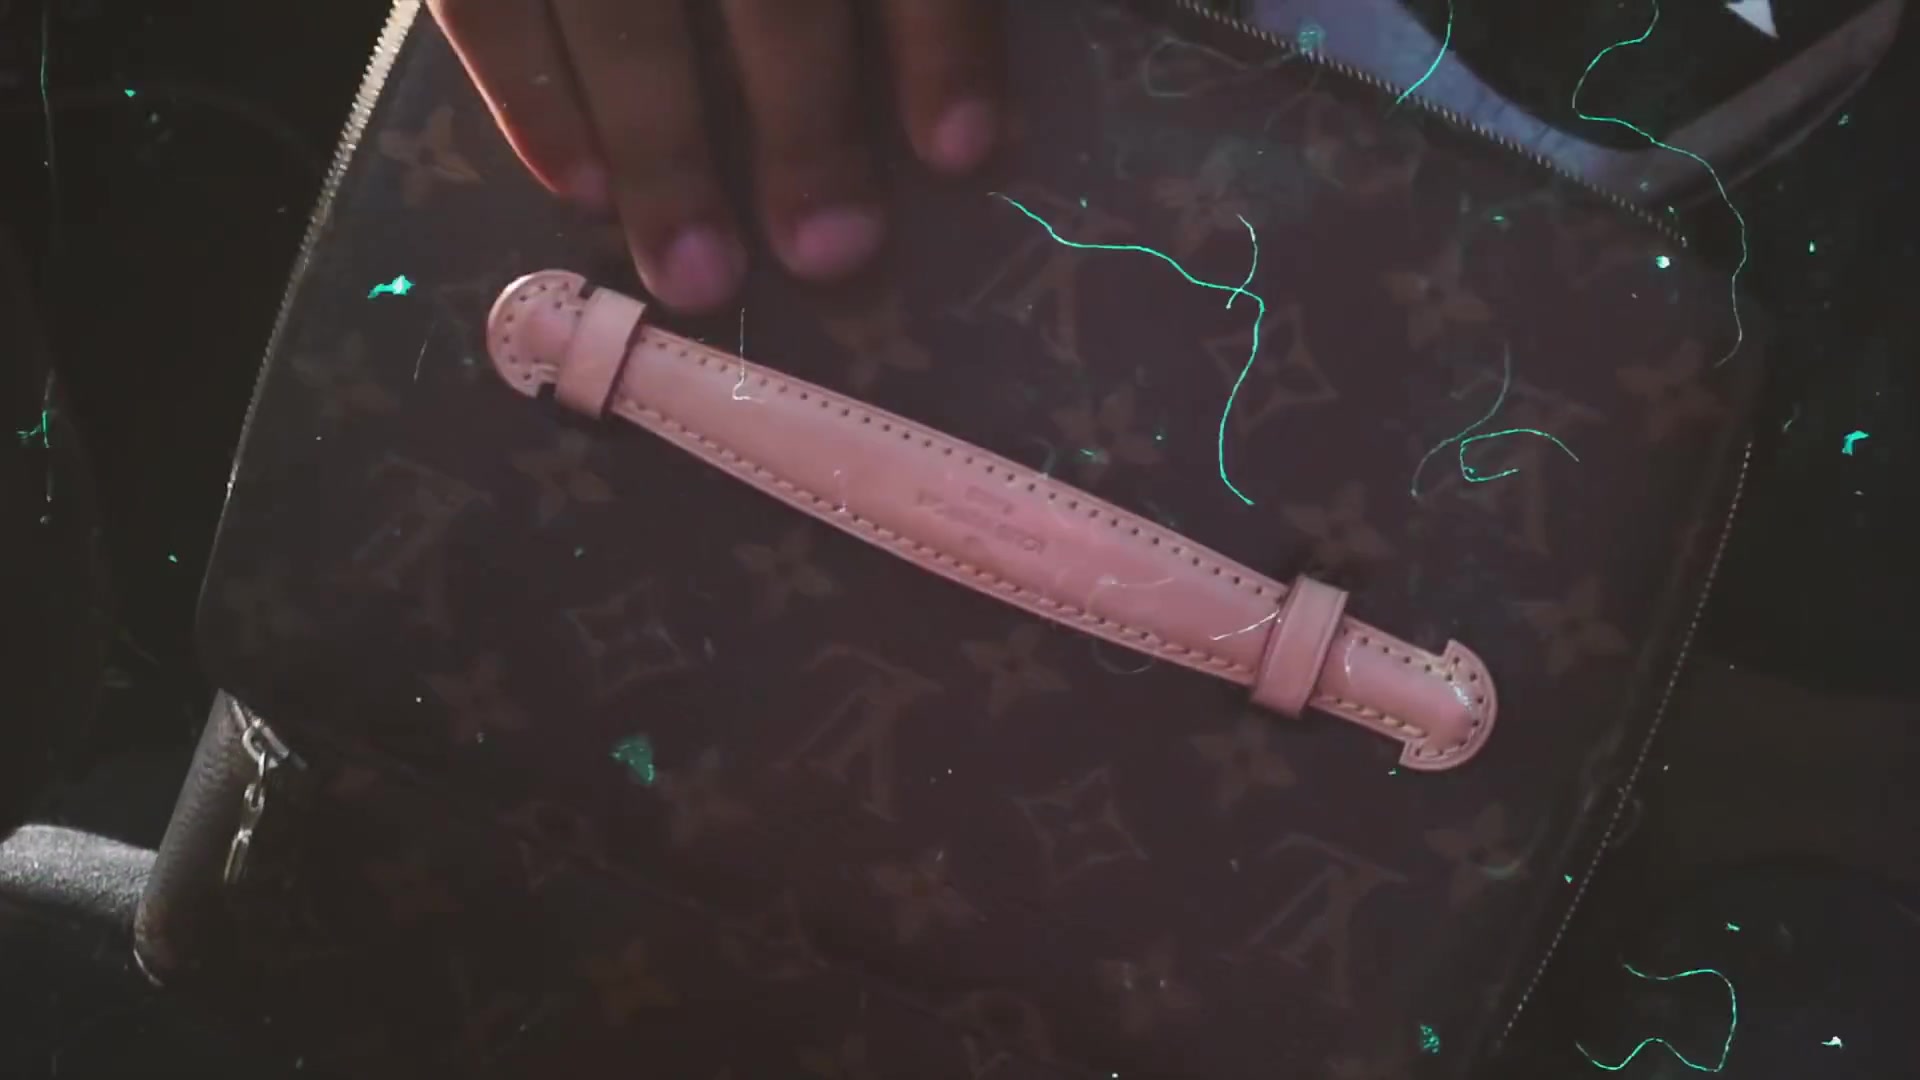 Louis Vuitton Jewellery Bag in &quot;4 Phones&quot; by Rich The Kid (2019)